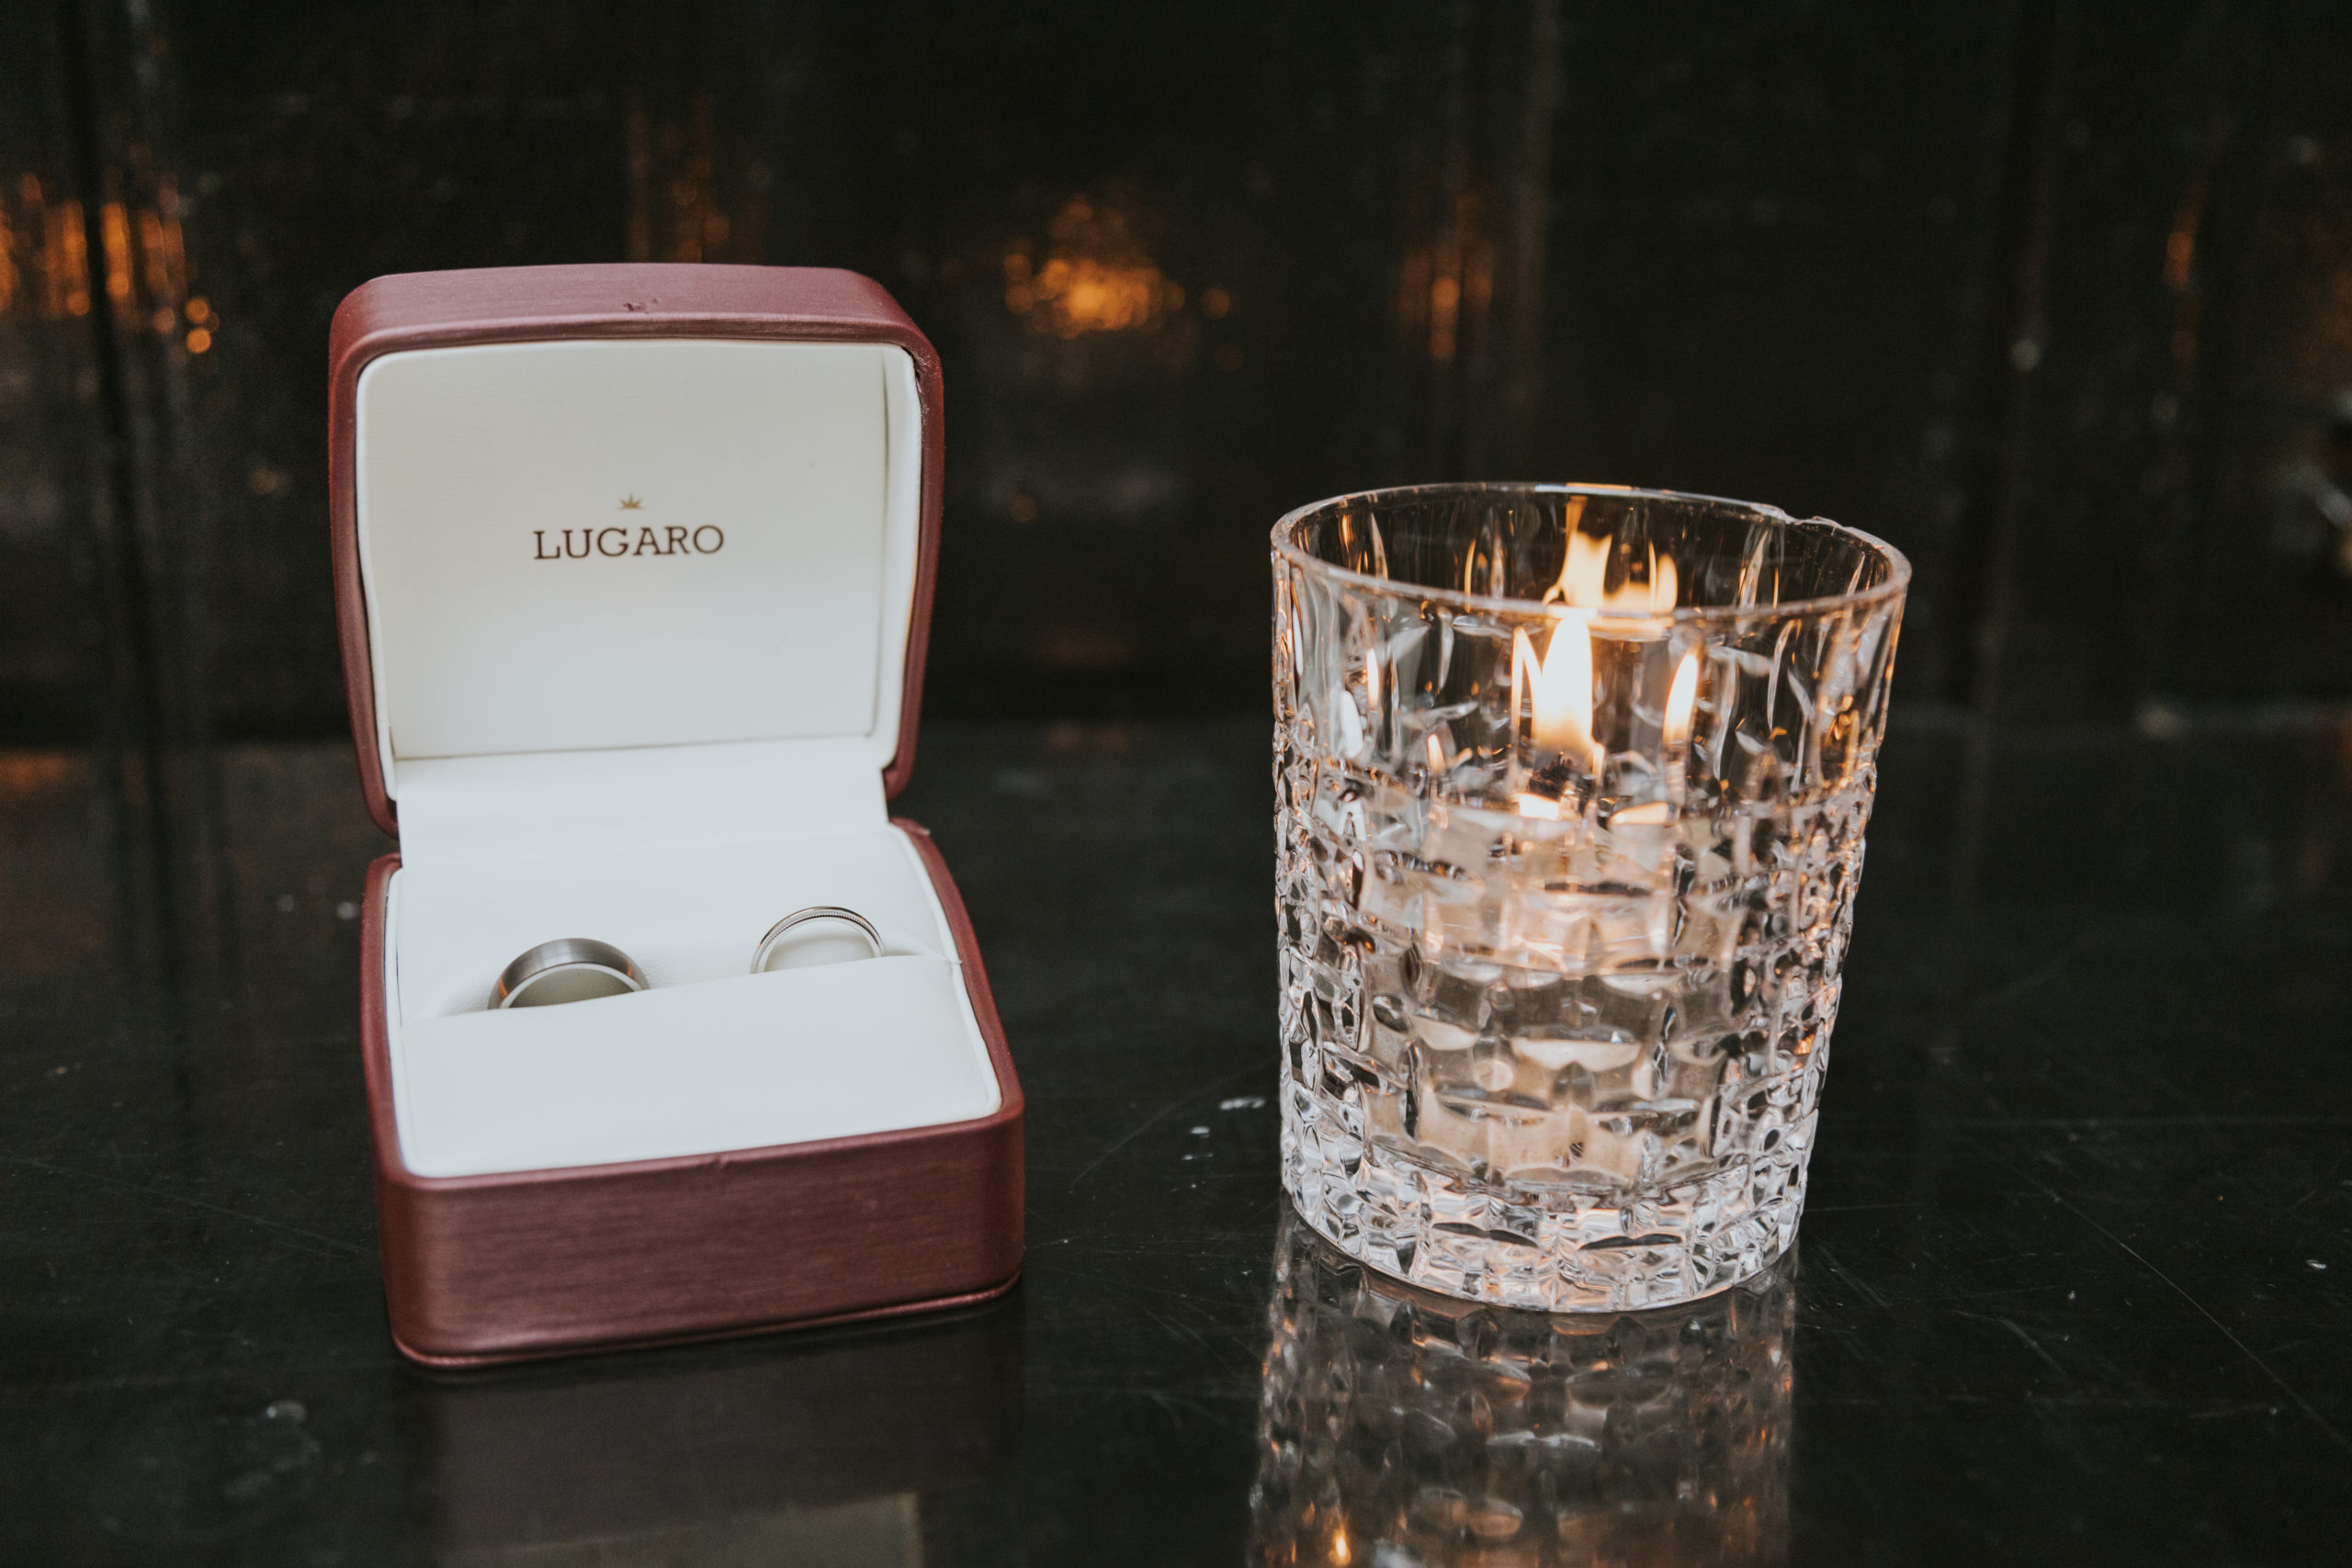 Imprint Your Love With 10 Timeless Wedding Gifts Exchange They Can't Forget